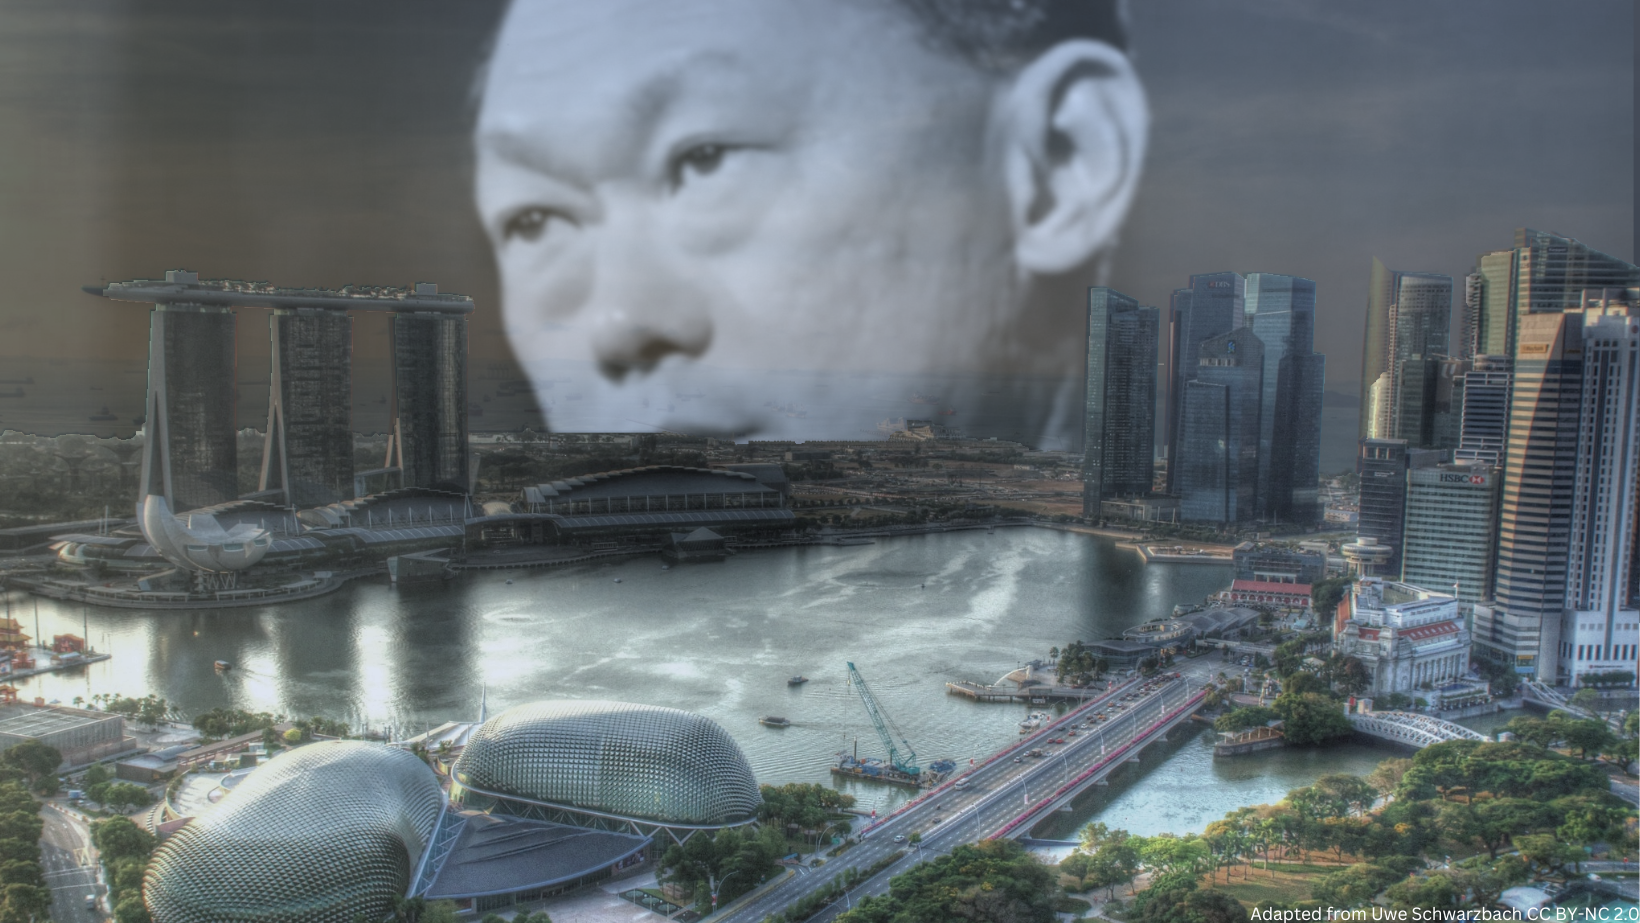 ‘Disney Land with the Death Penalty’: Singapore and the Price of Utopia